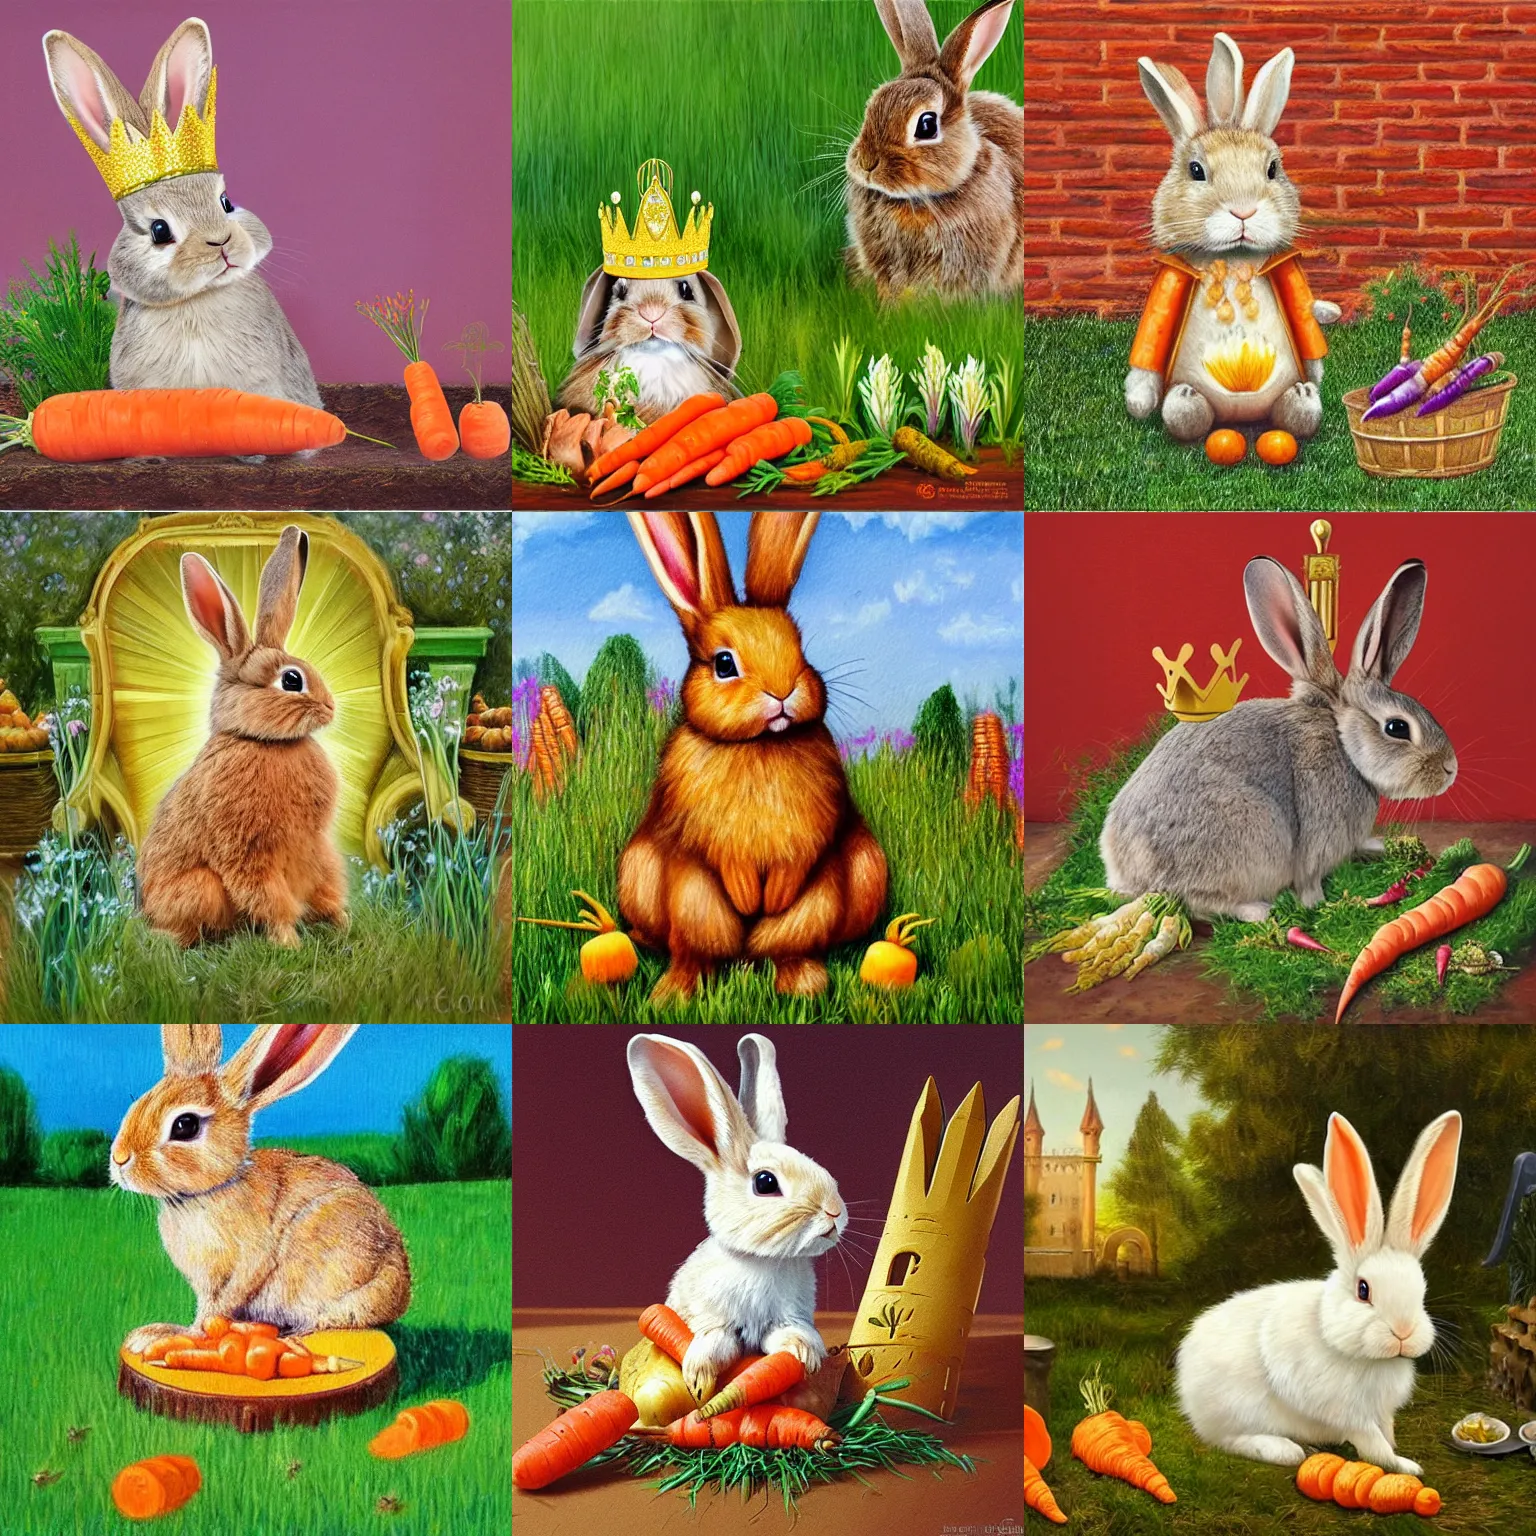 Prompt: rabbit wearing golden crown, sitting on throne, realistic oil painting, cute, carrot, vegetables, grass, plants, bricks, castle, red carpet, highly detailed